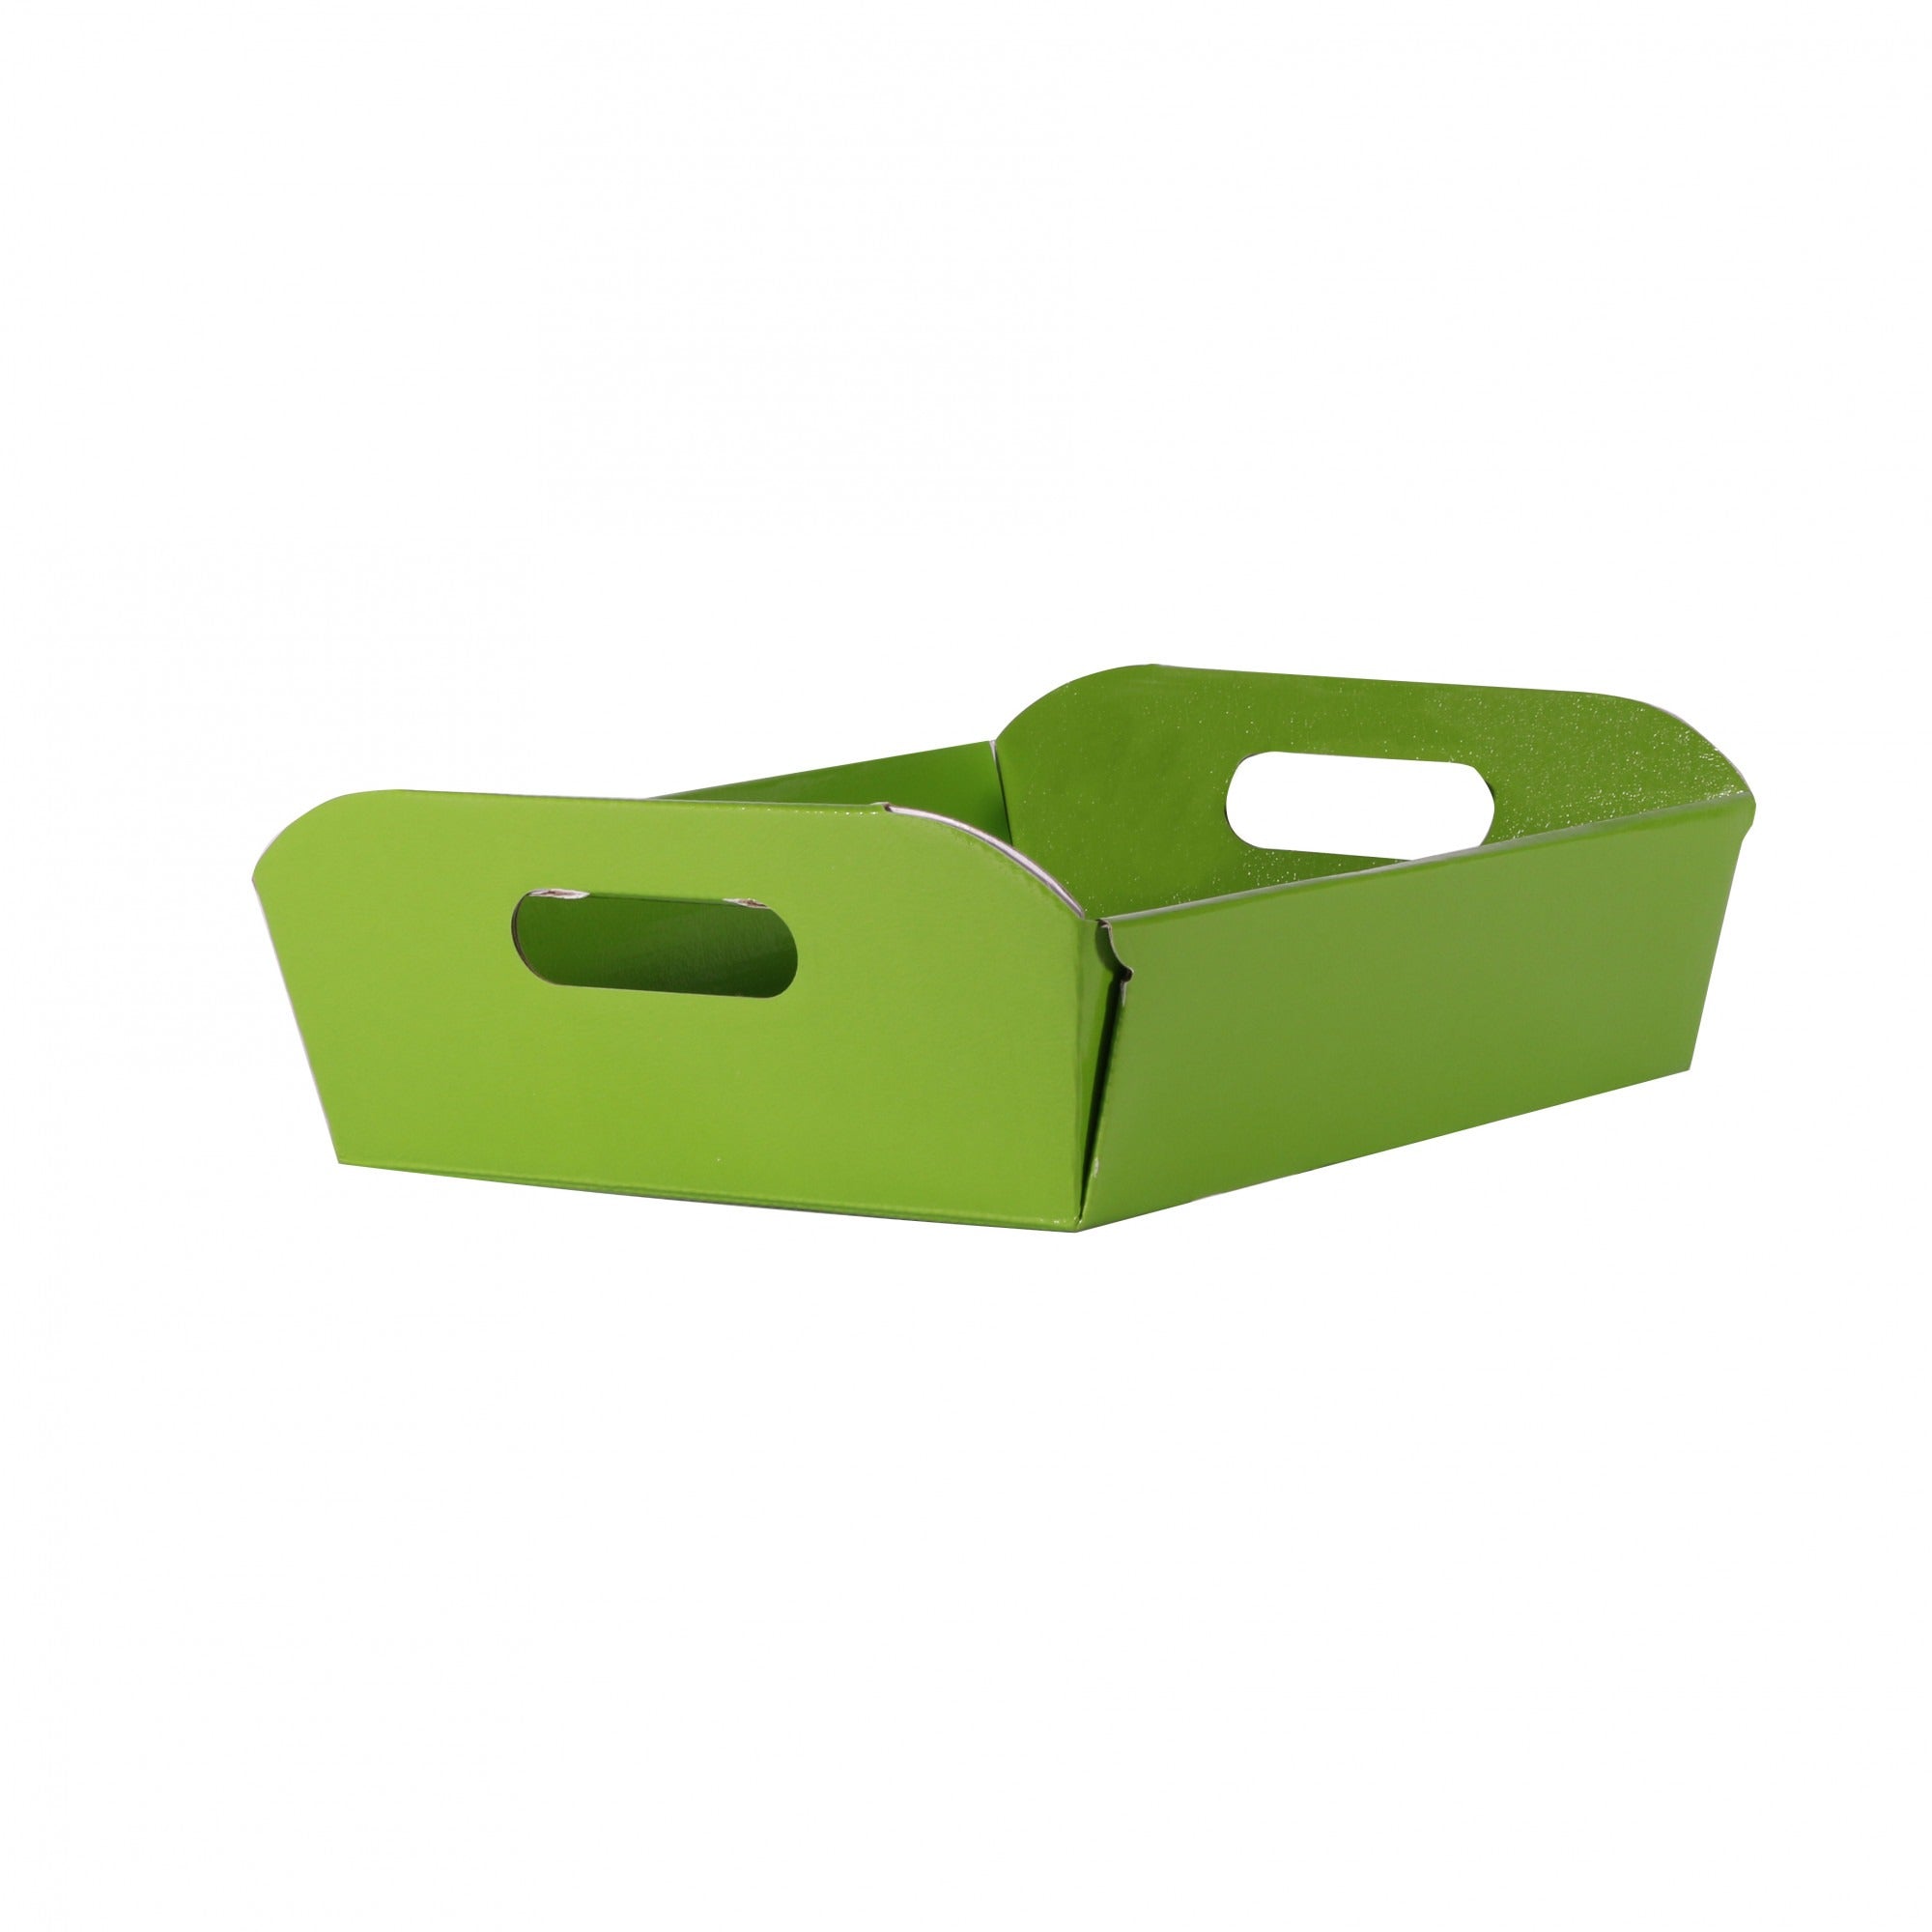 View 345cm Lime Green Small Hamper Box information